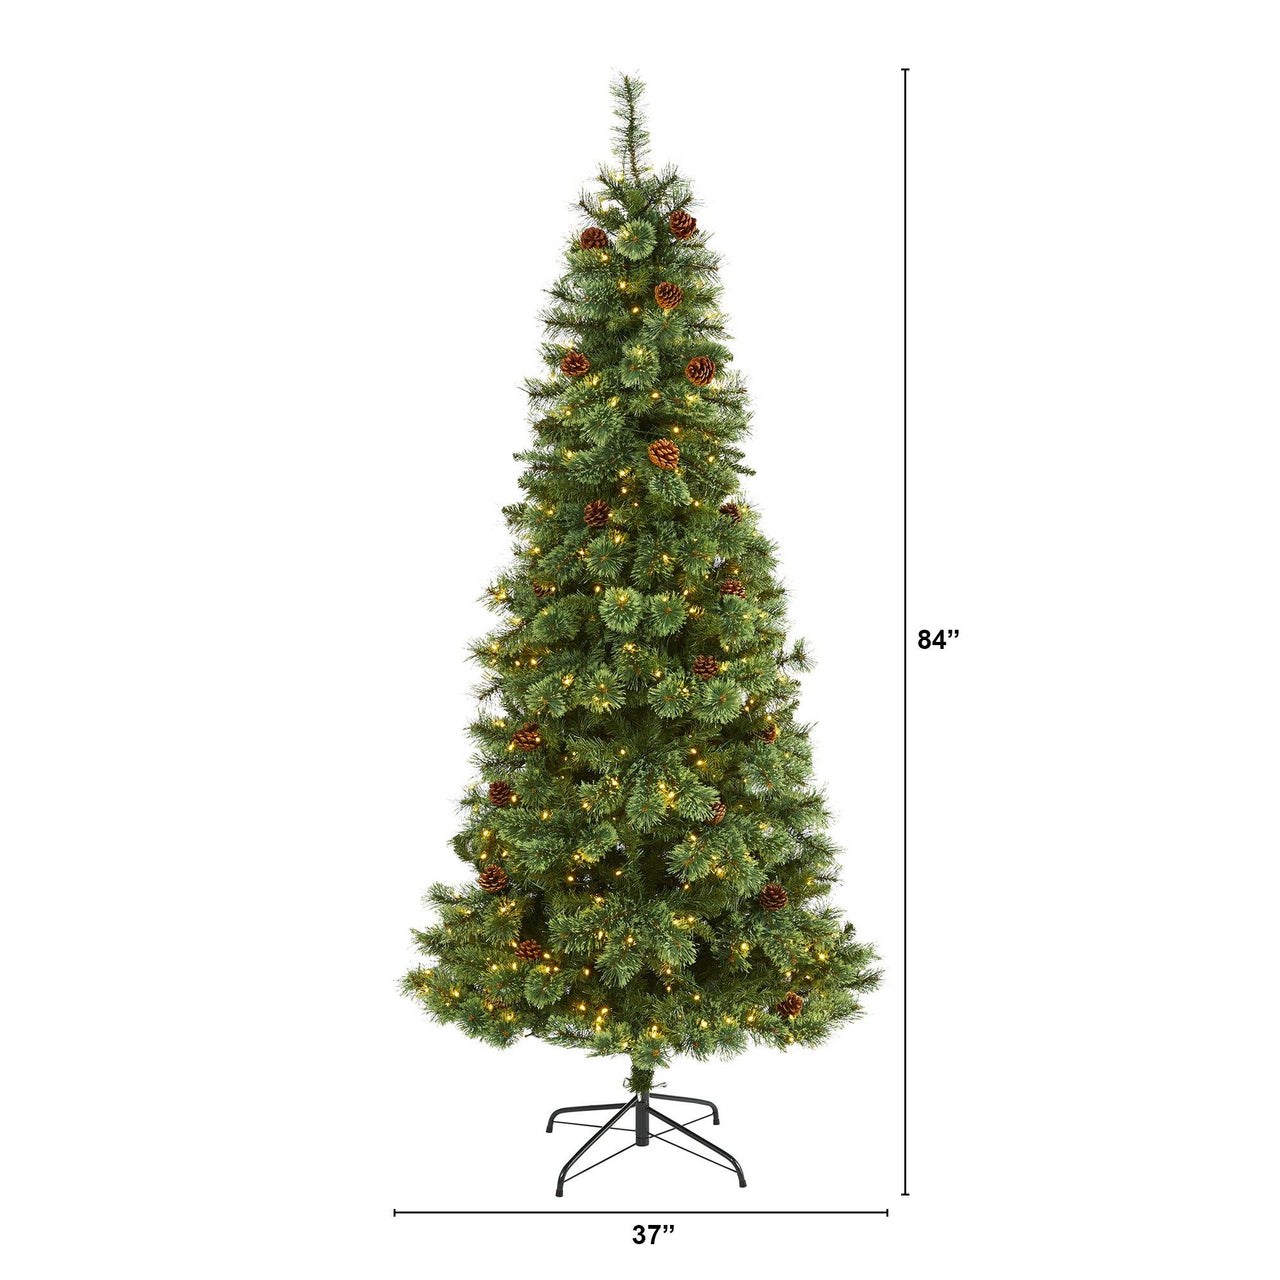 7’ White Mountain Pine Artificial Christmas Tree with 400 Clear LED Lights and Pine Cones - The Fox Decor